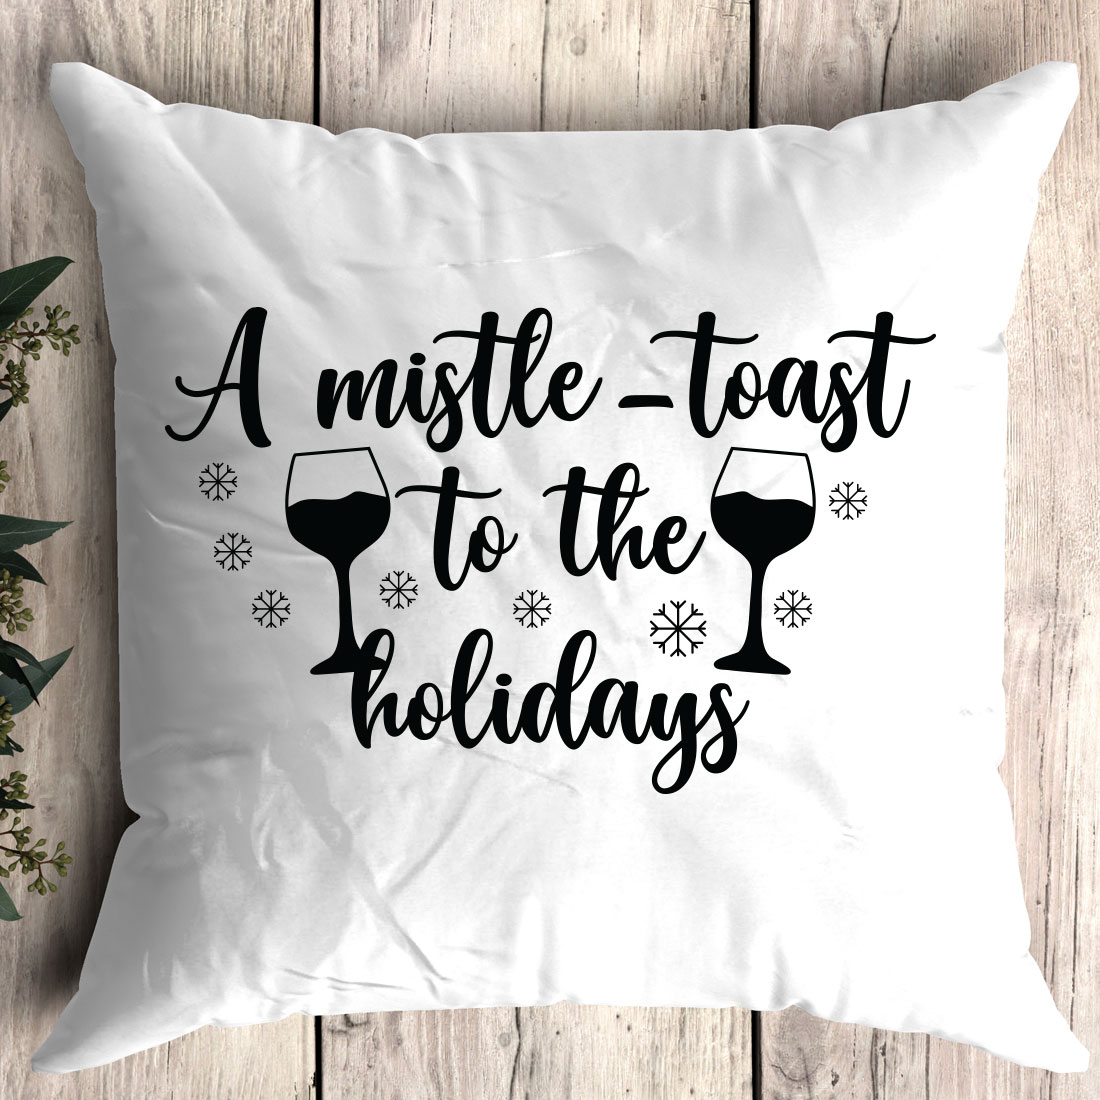 White pillow that says a mistle - toast to the holidays.